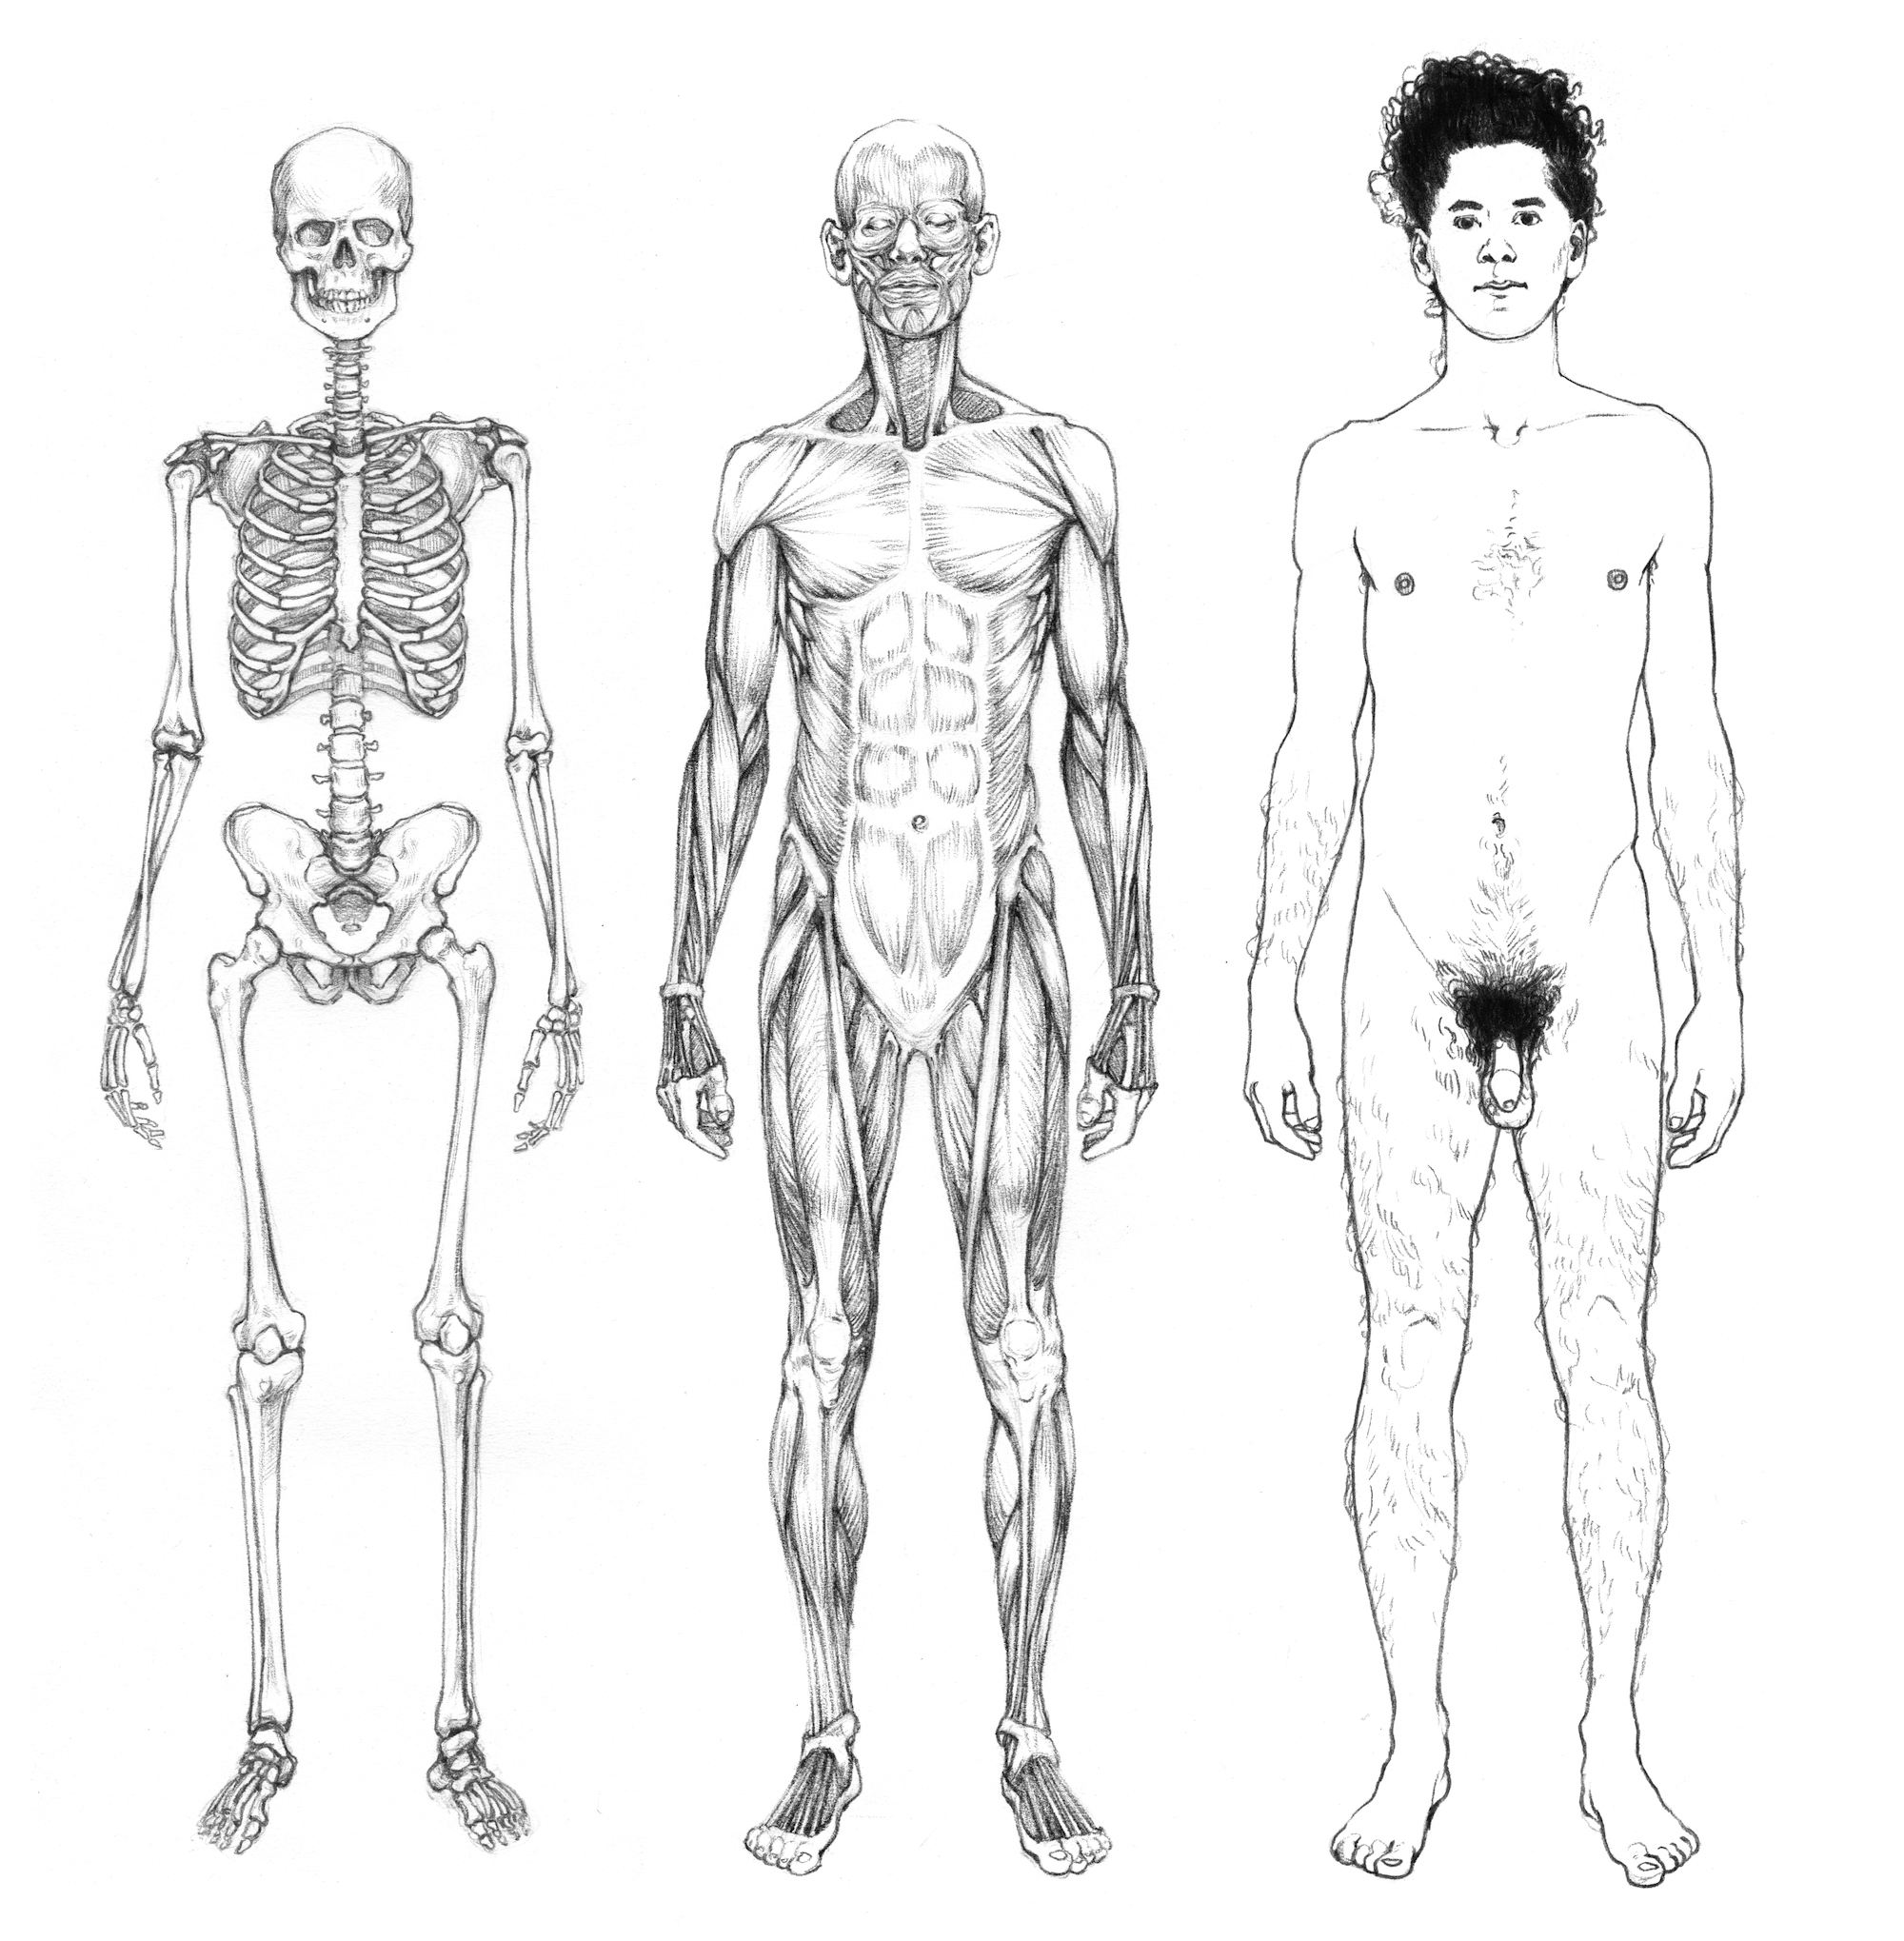 Drawing Body Parts - Anatomy of a Sketch